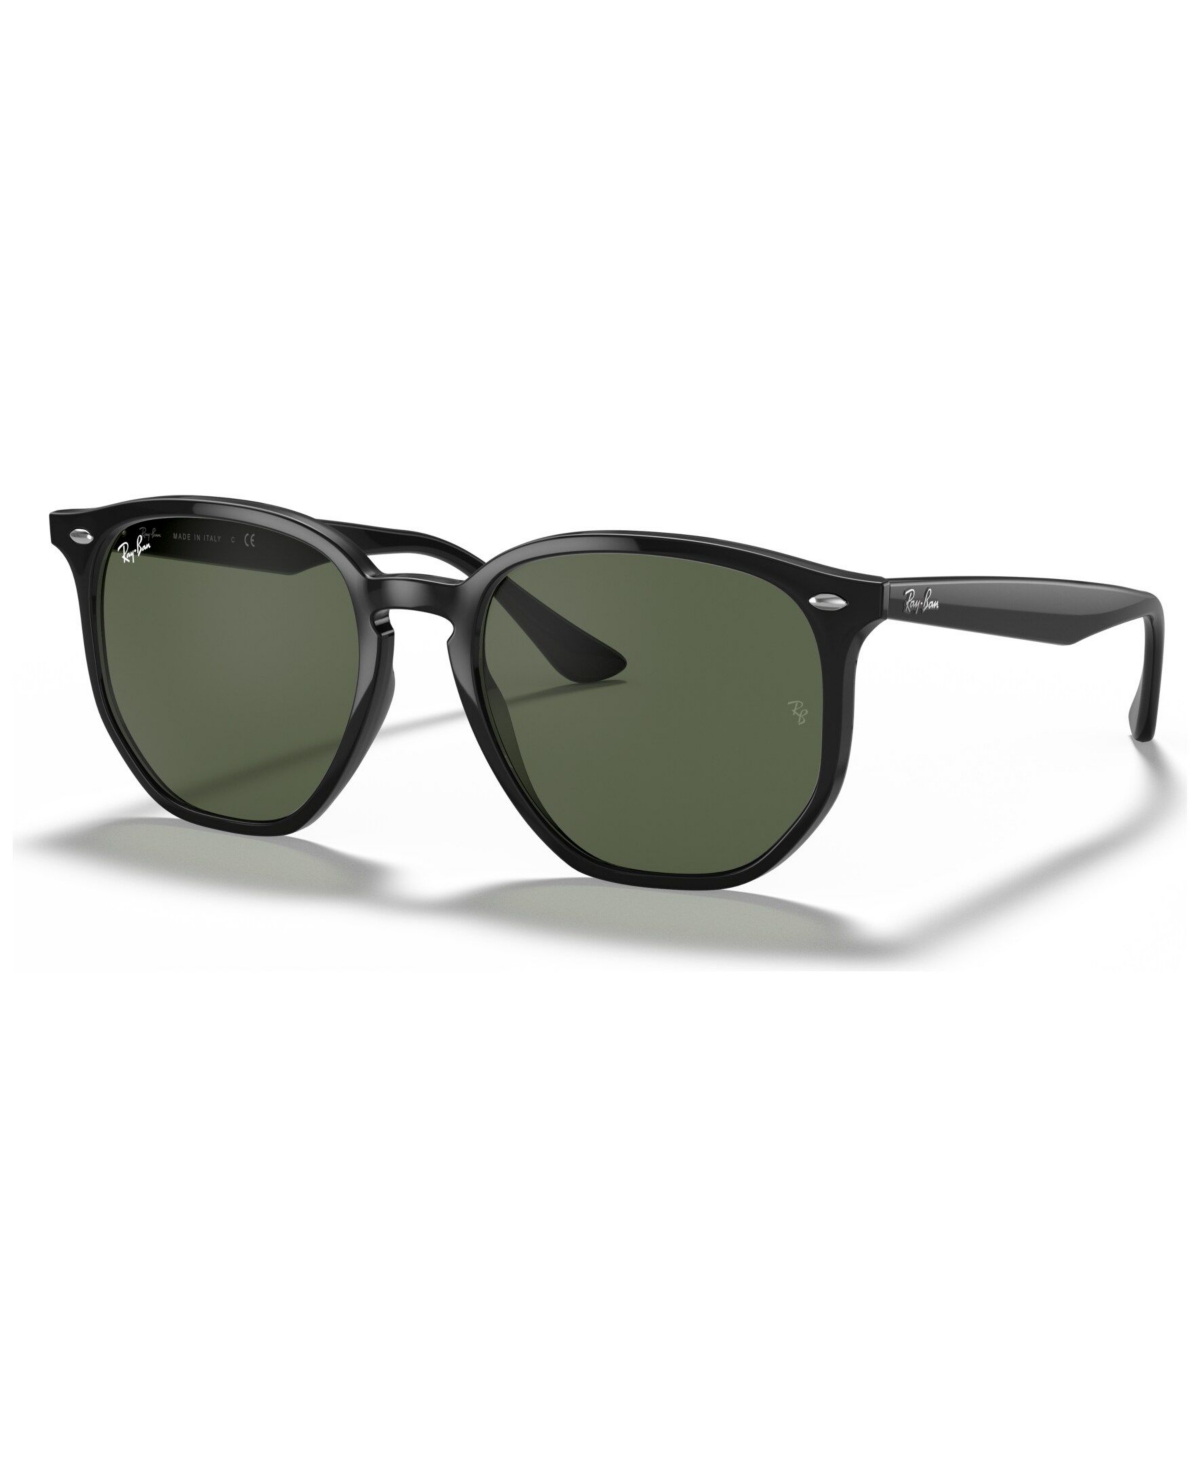 Ray Ban Sunglasses, Rb4306 In Black,green